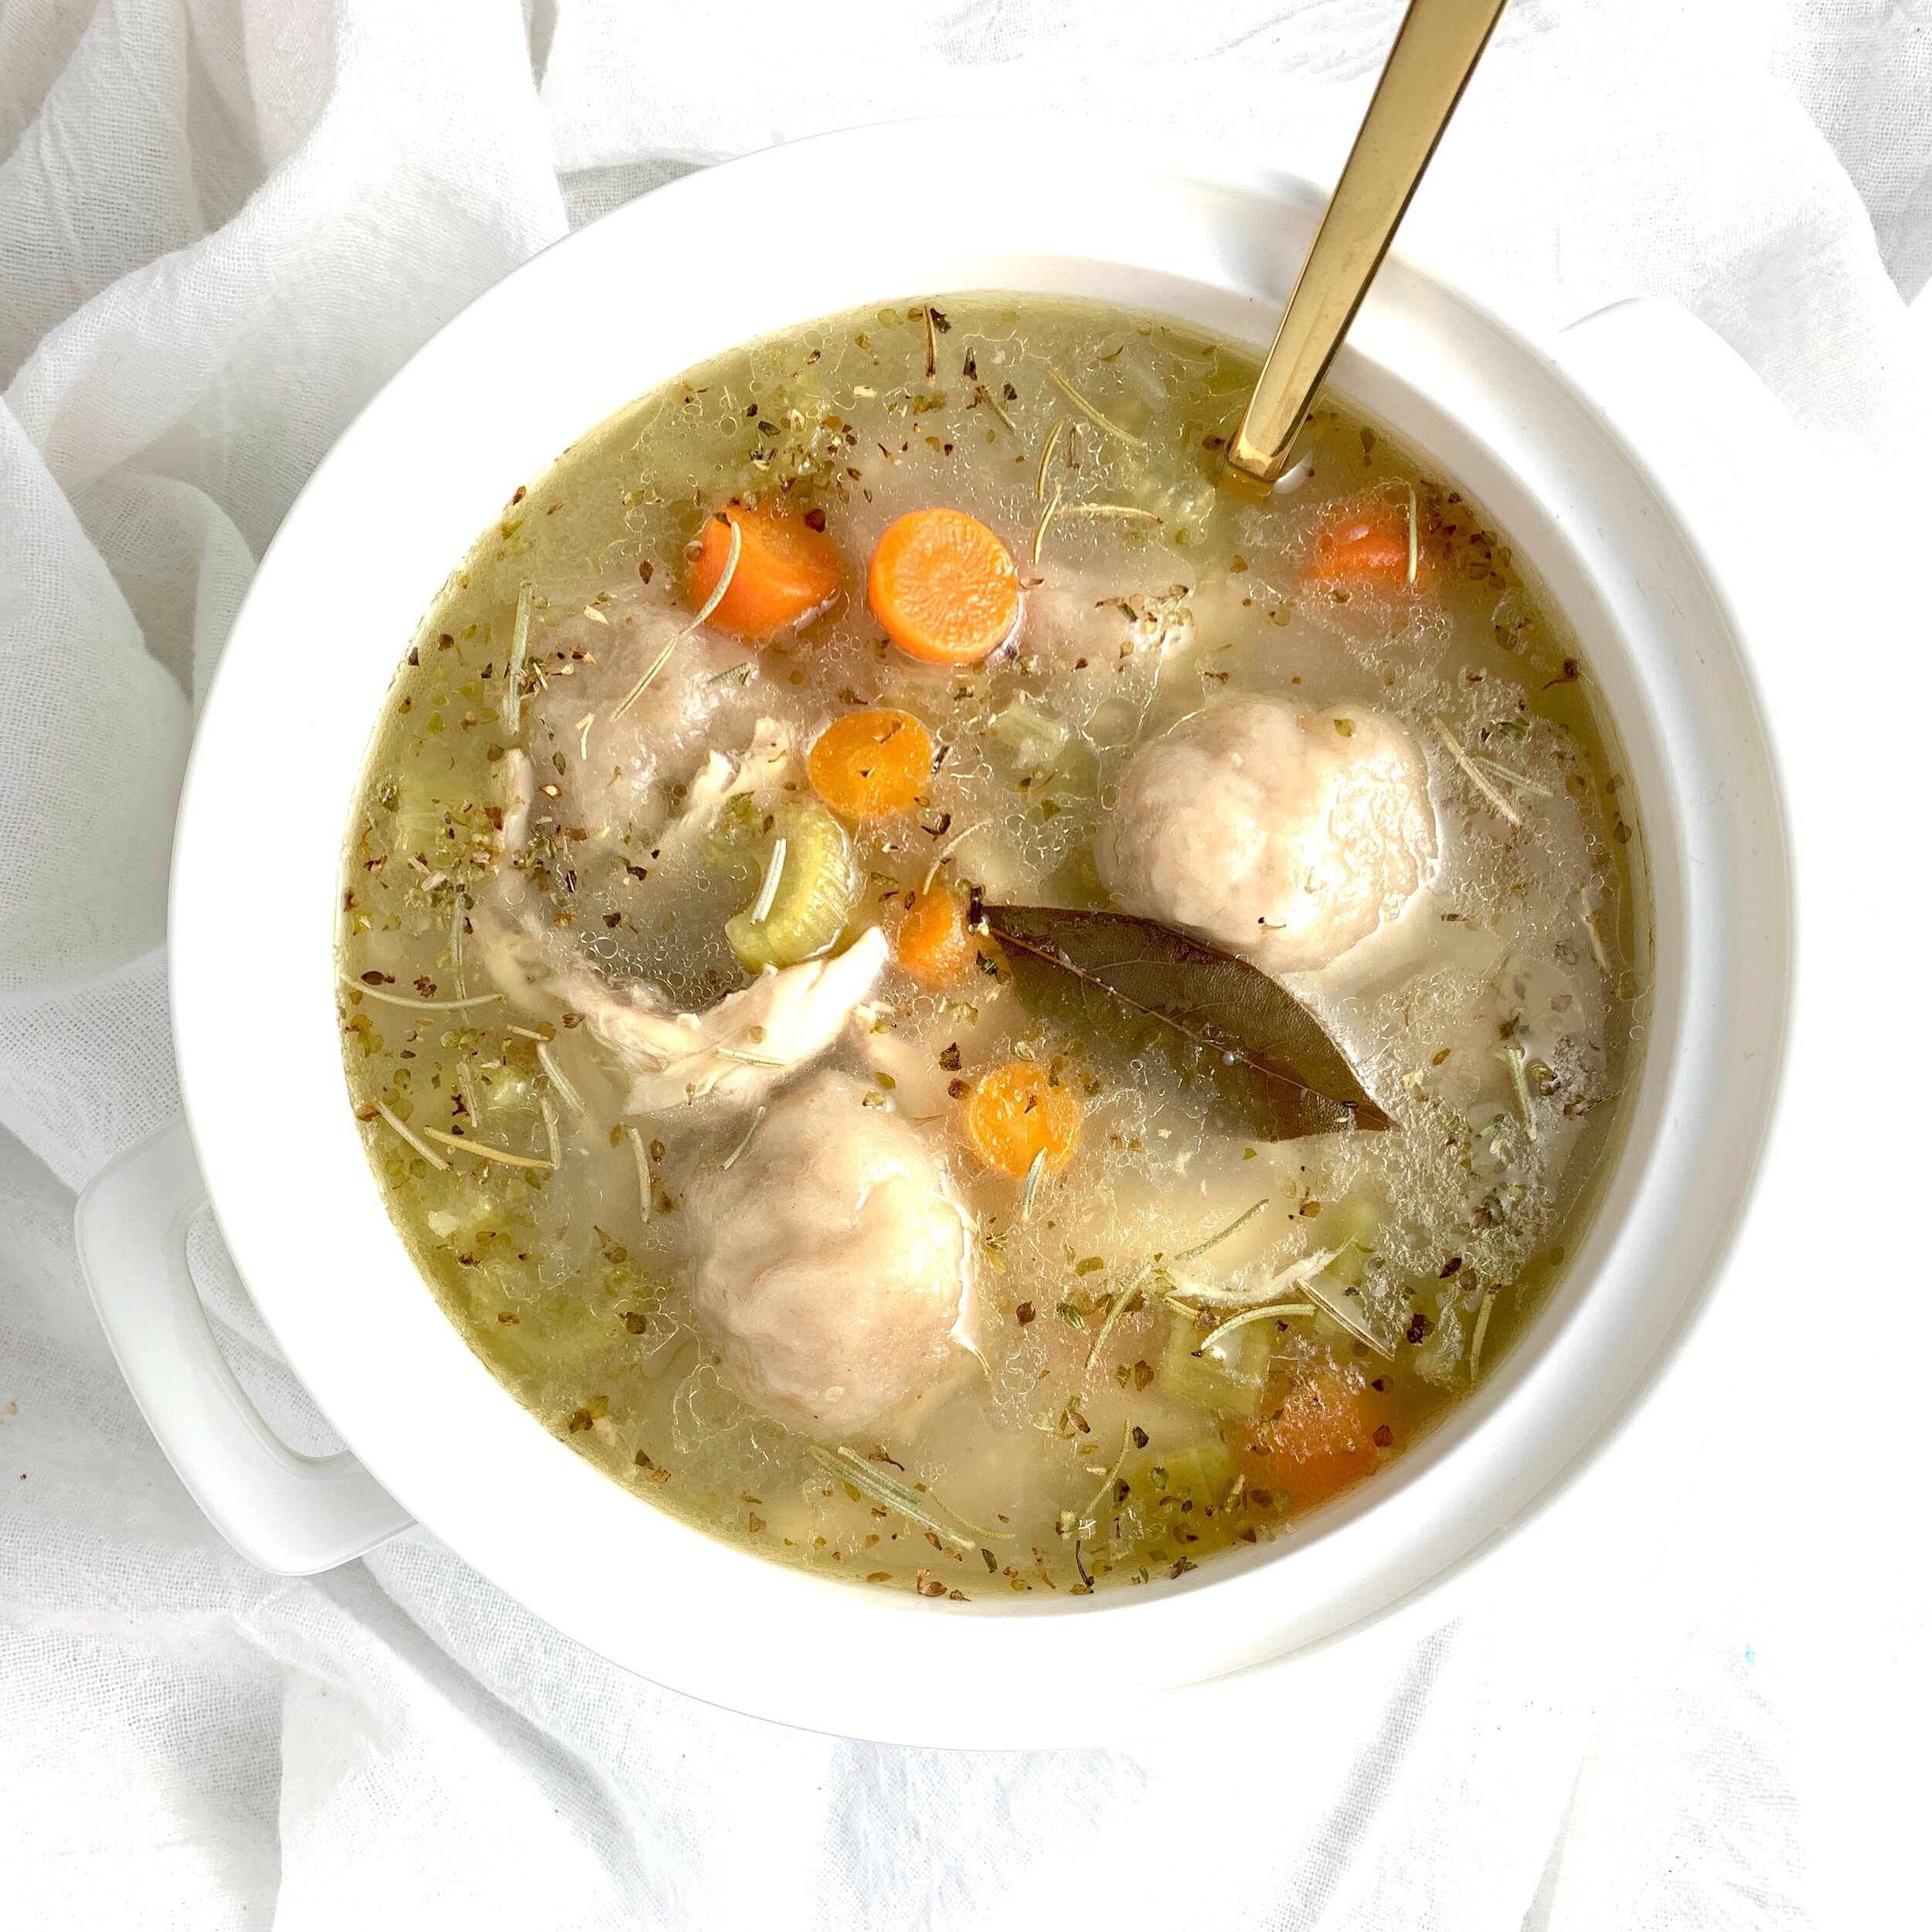 Old Fashioned Chicken and Dumplings Recipe